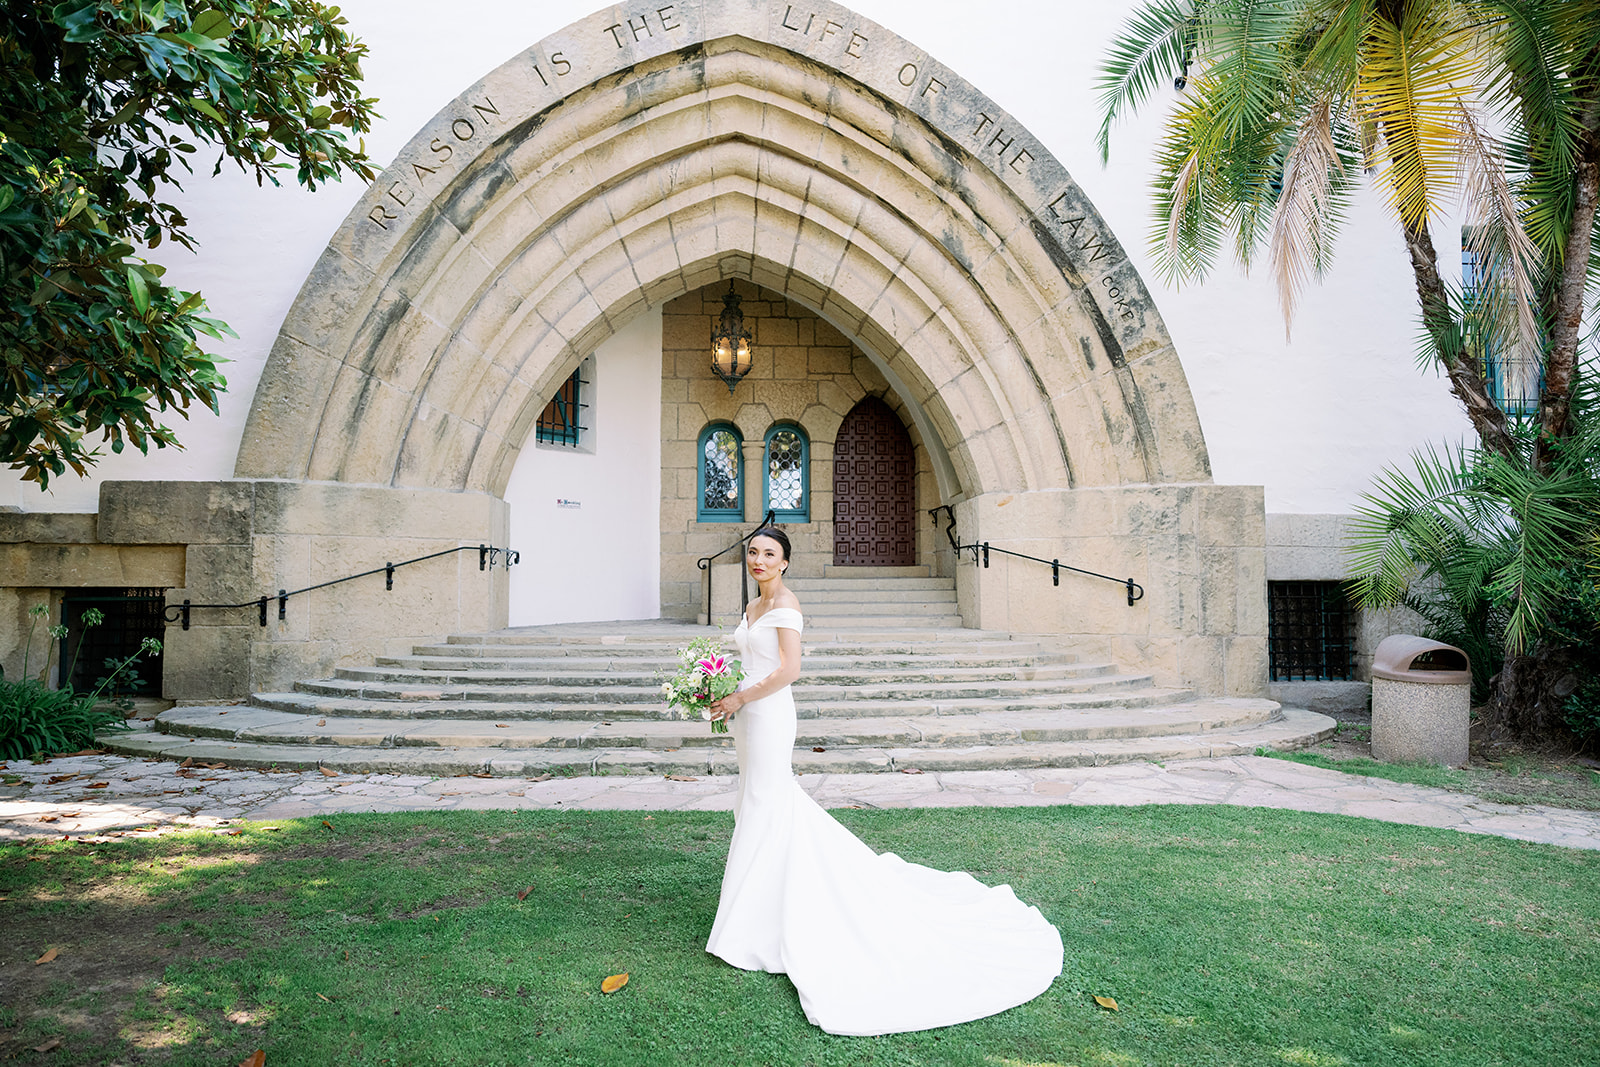 Bride posing in front of the Santa Barbara Courthouse.